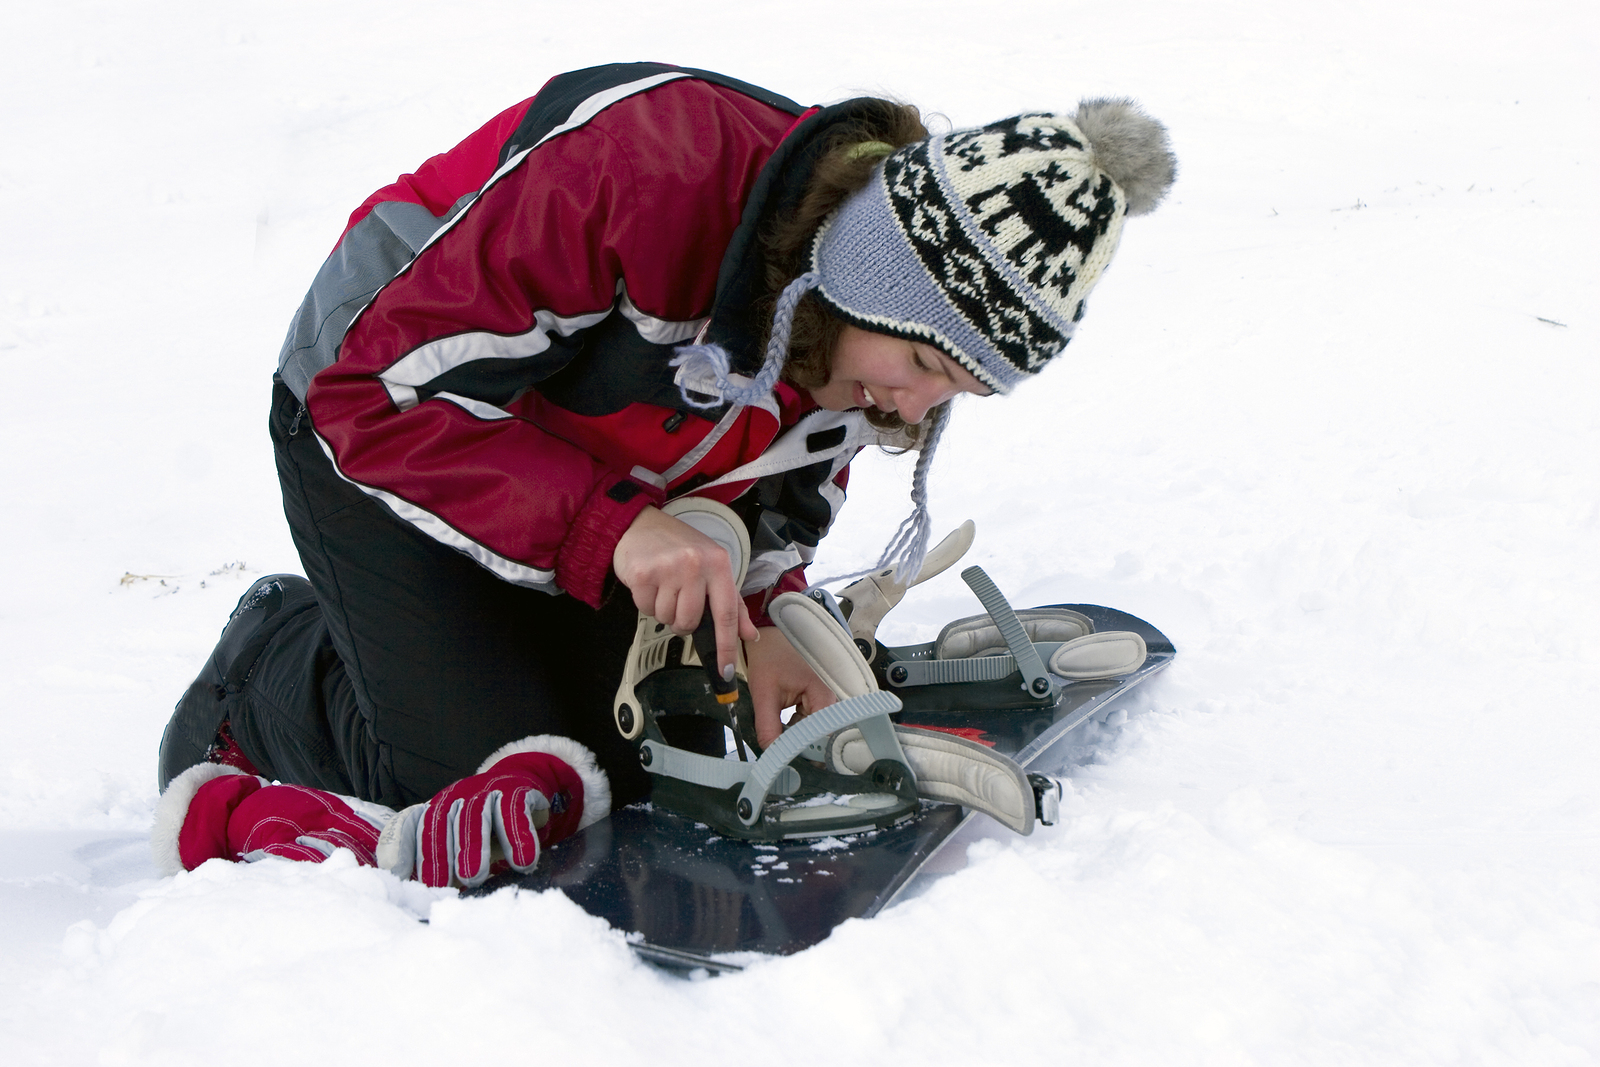 How to Clean Your Snowboard? 